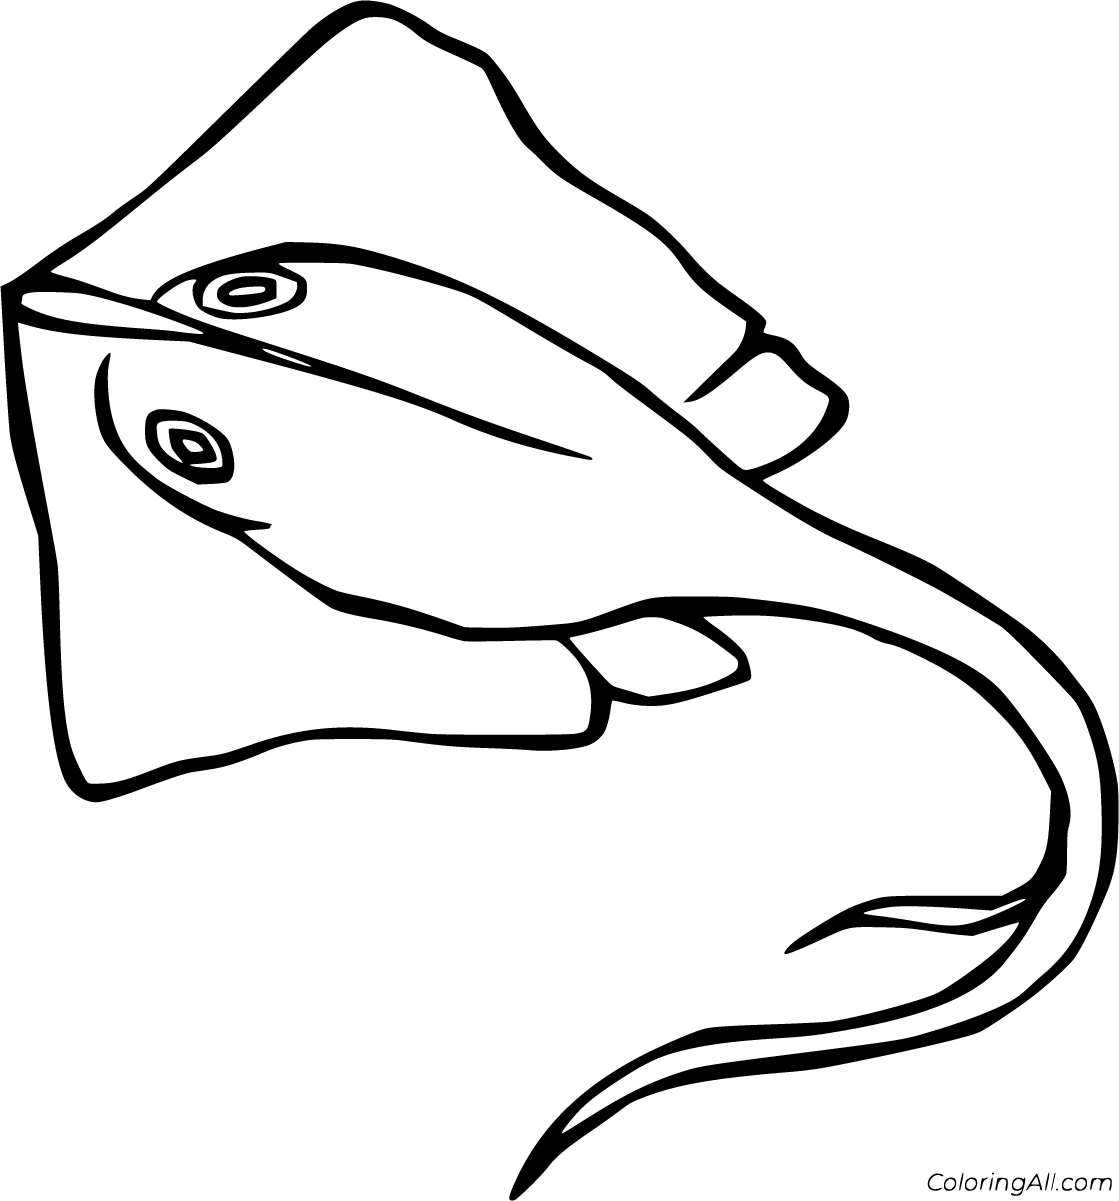 Stingray Coloring Pages - ColoringAll